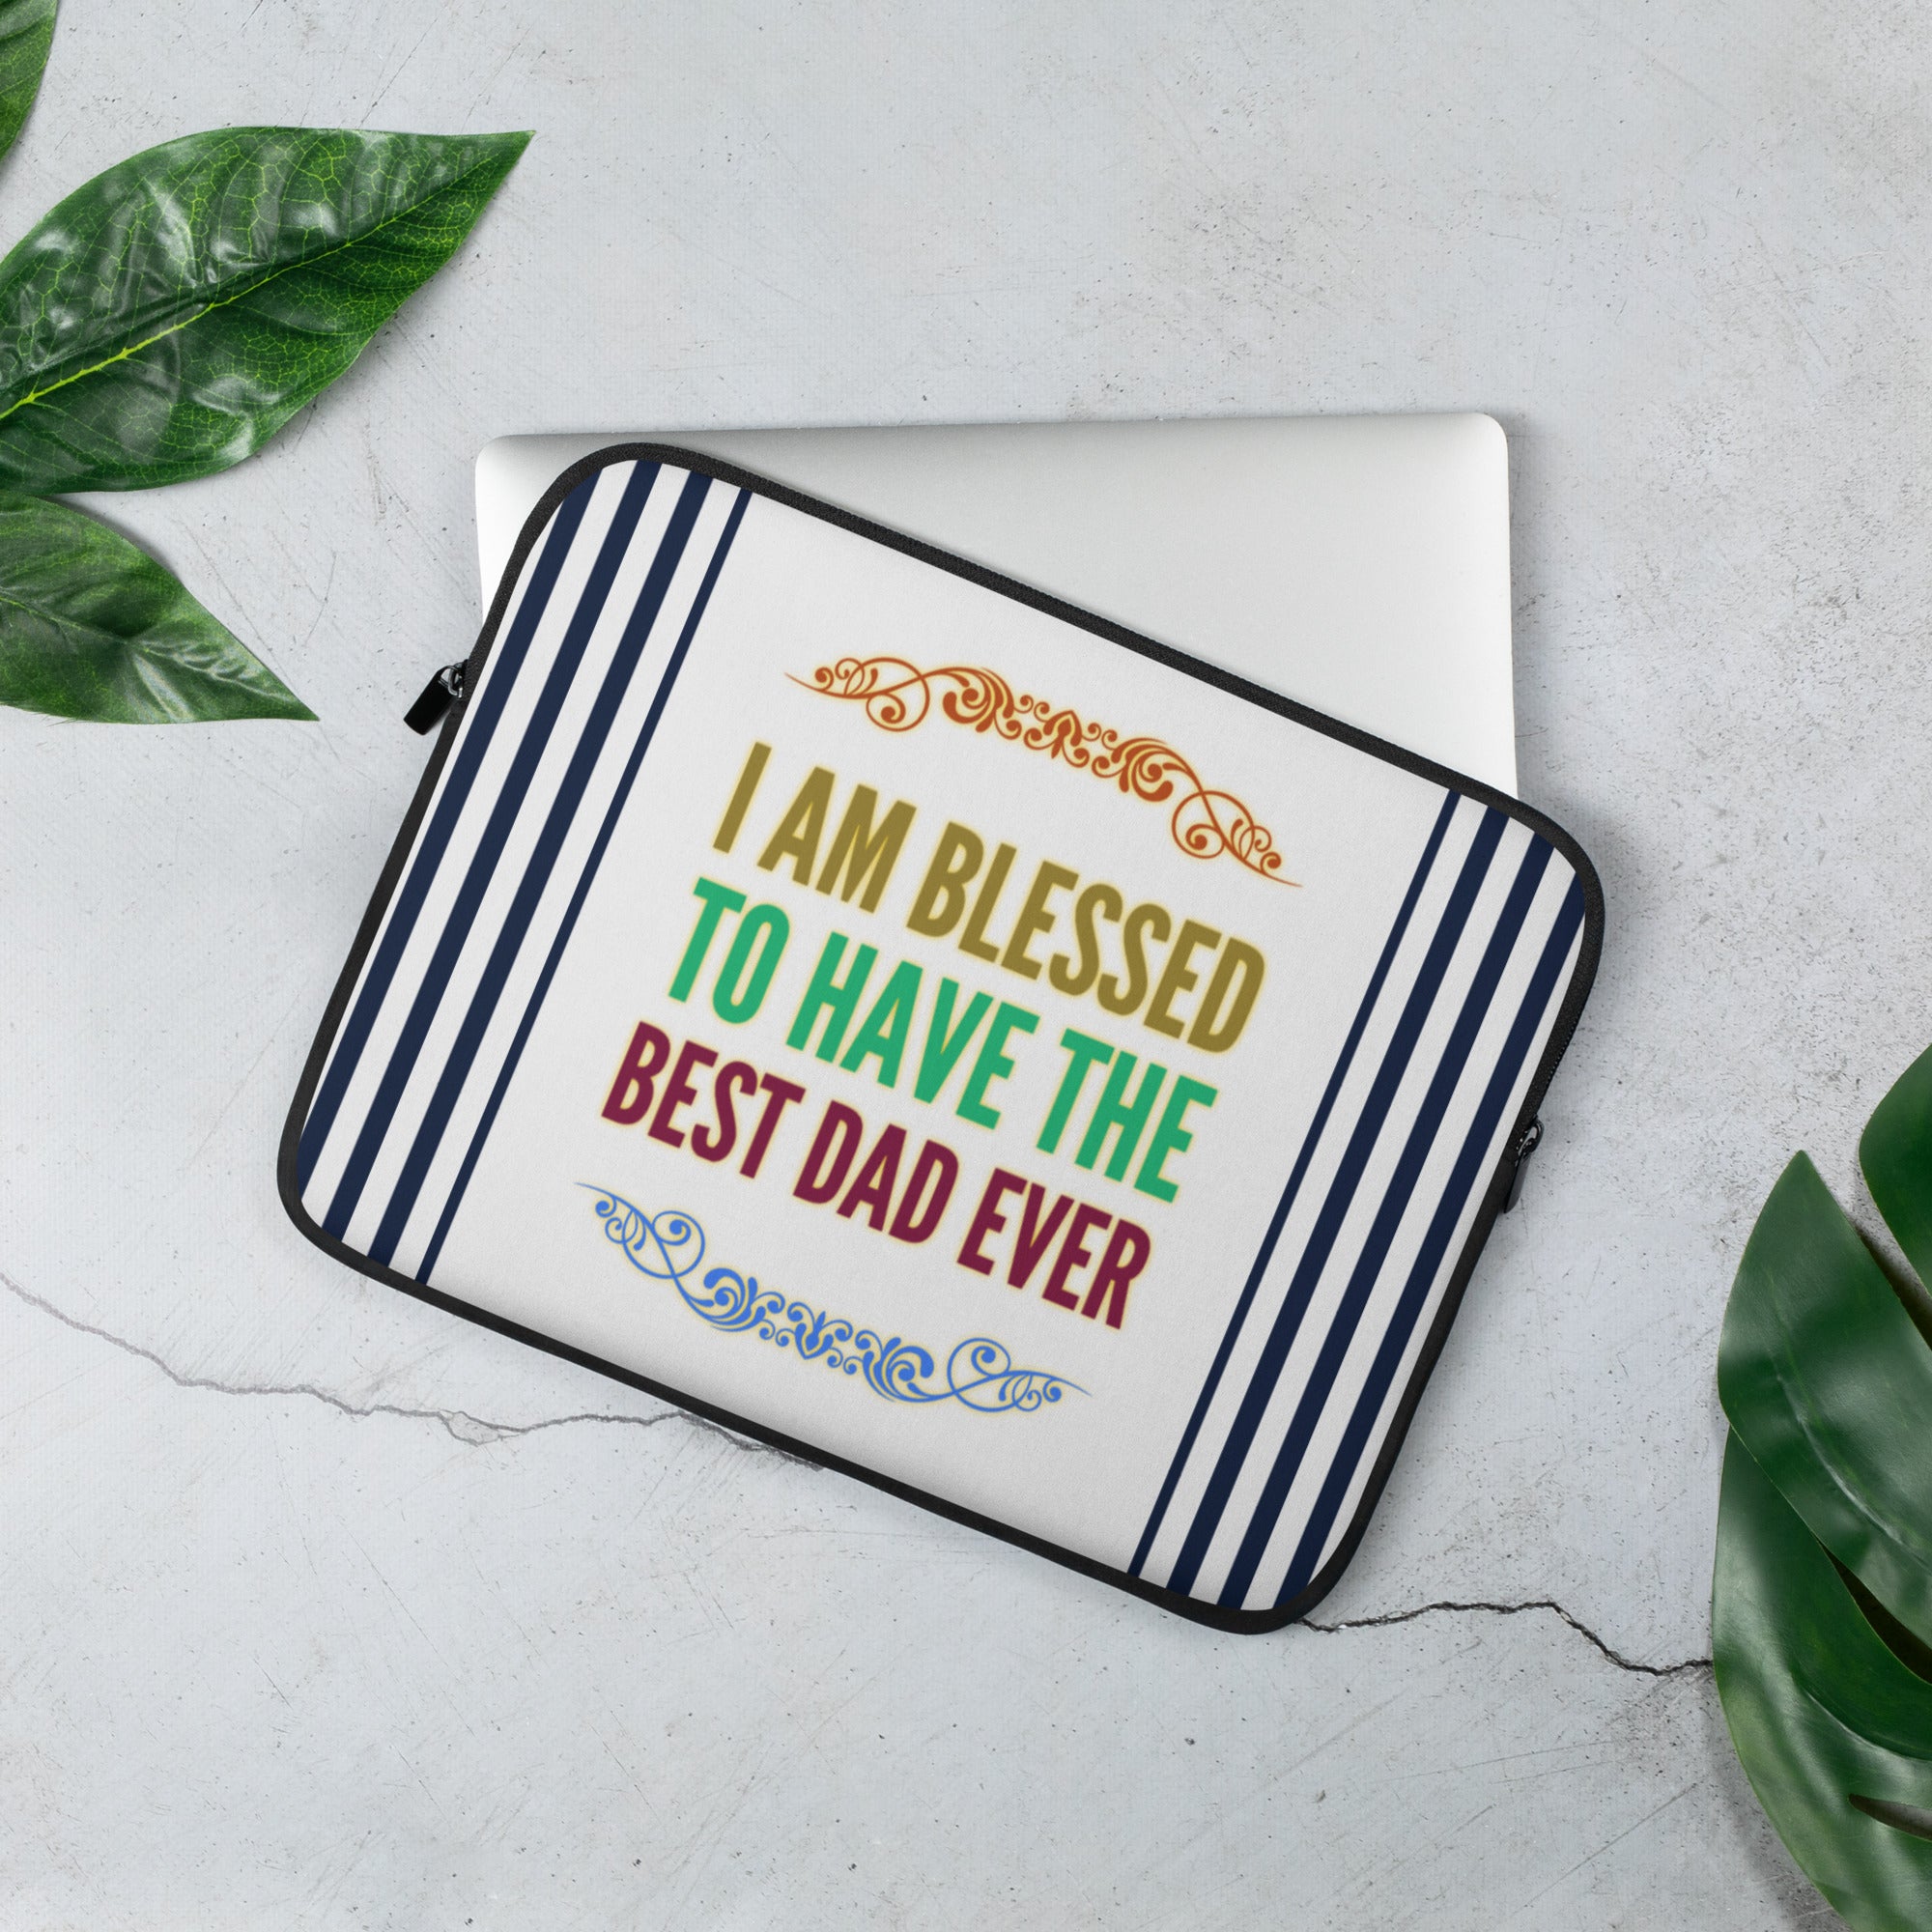 GloWell Designs - Laptop Sleeve - Affirmation Quote - Gift - Best Dad Ever - GloWell Designs